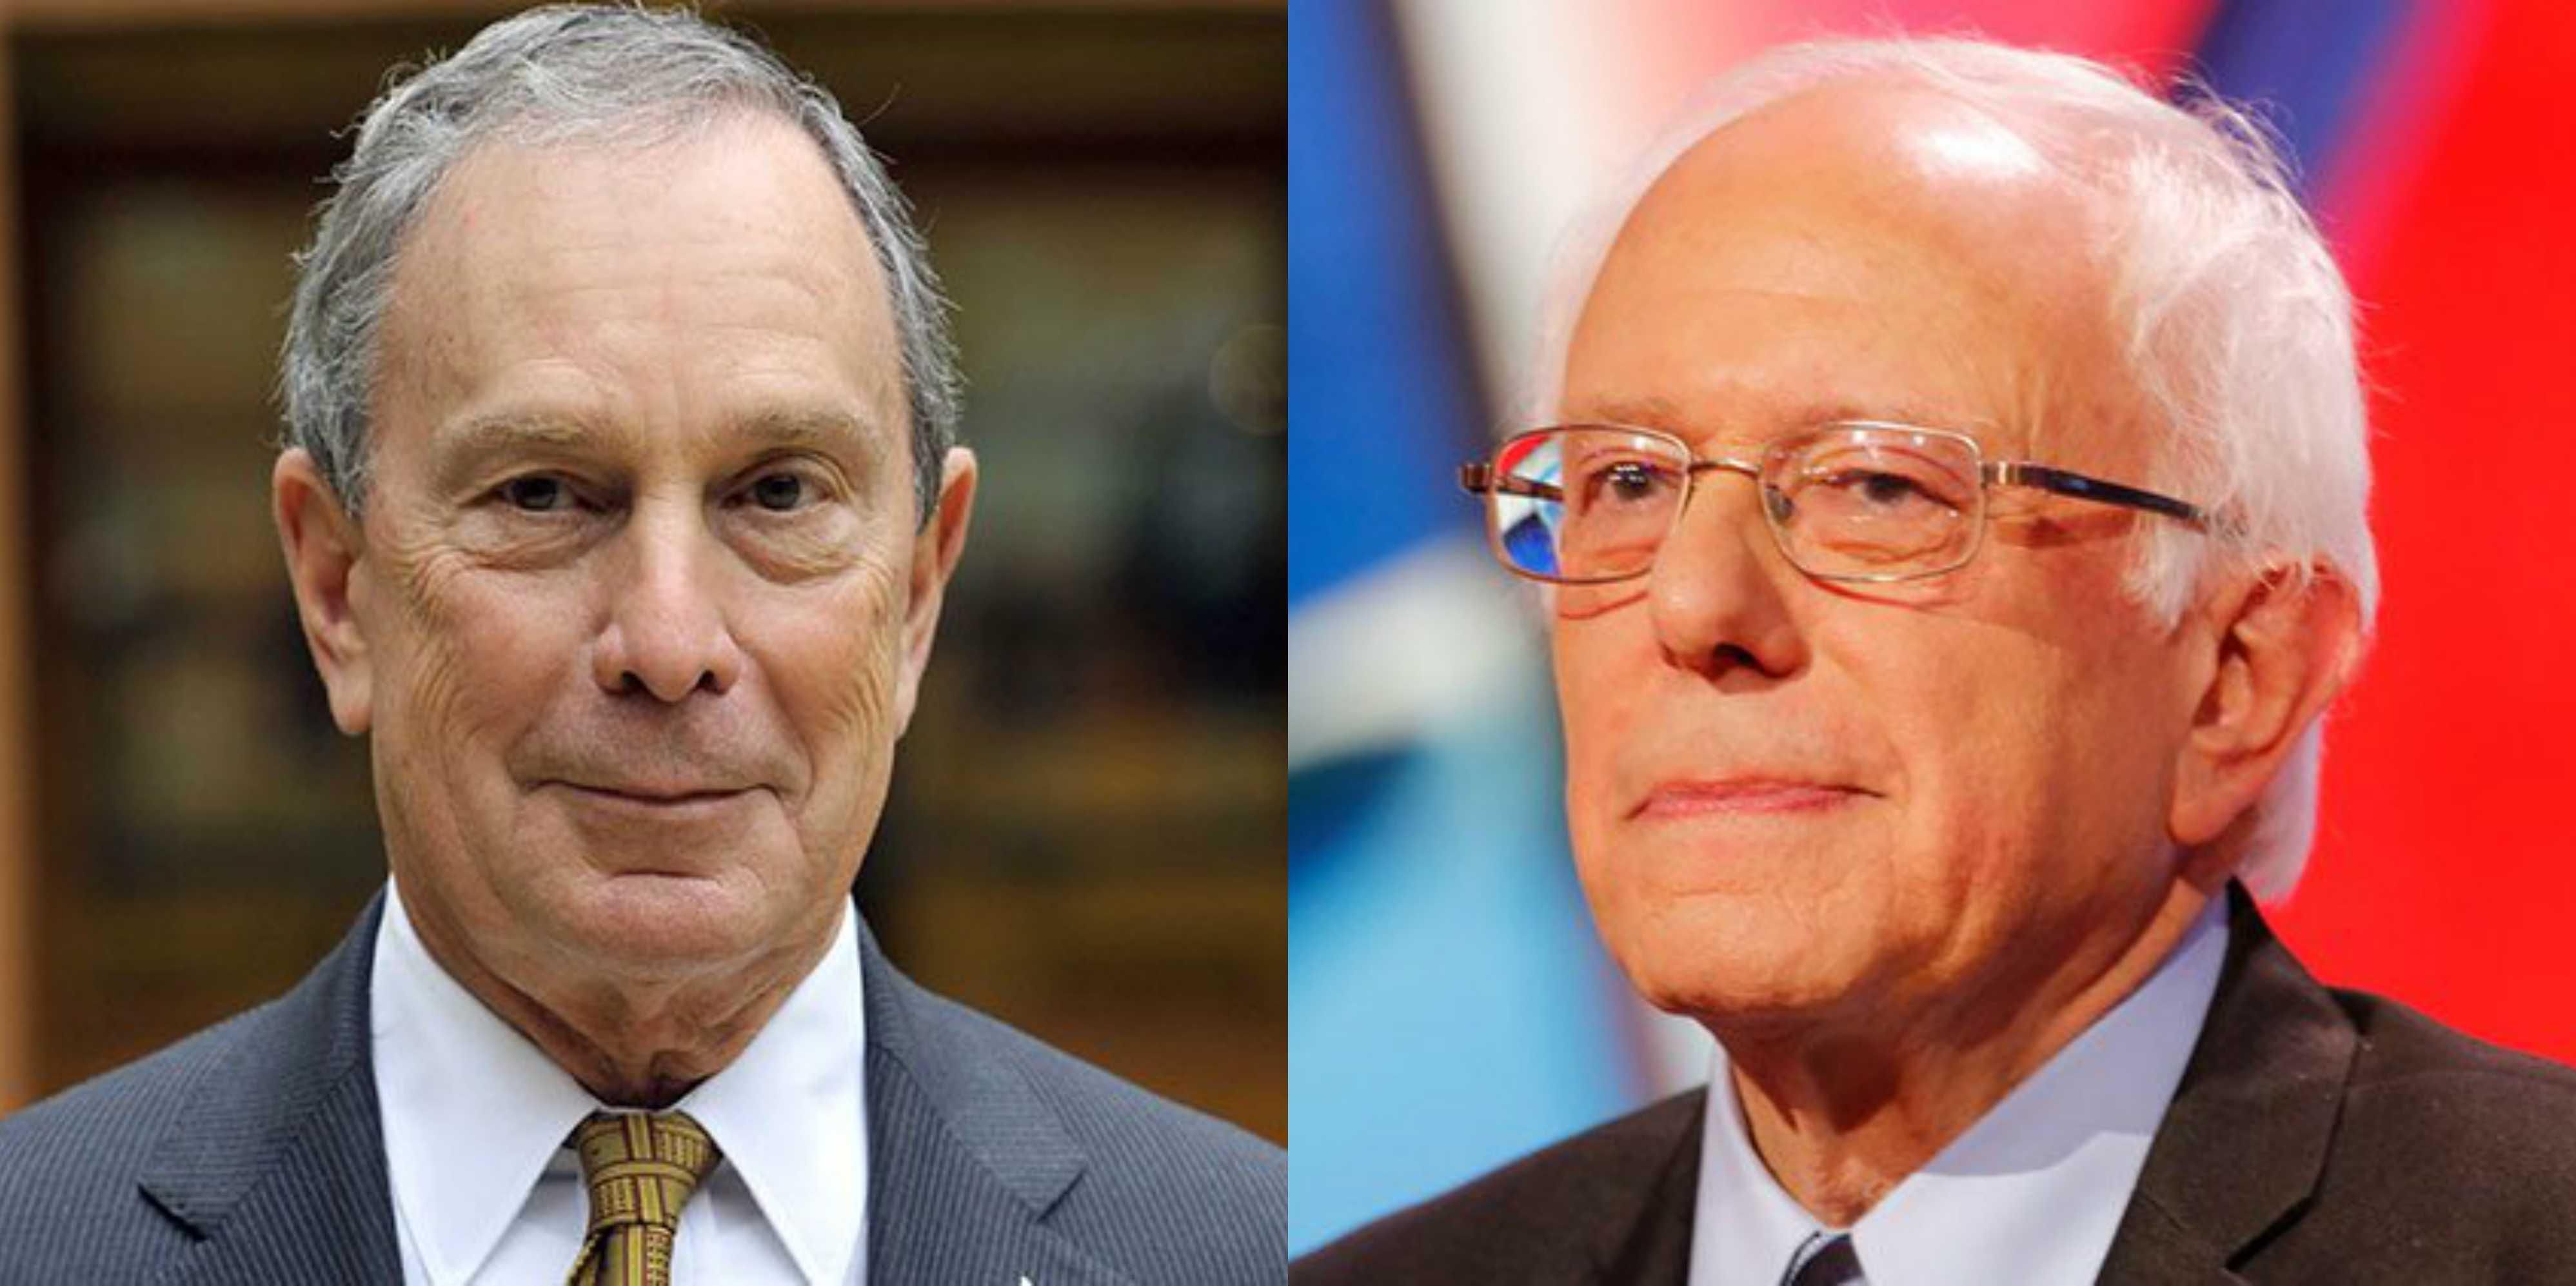 Bloomberg and Sanders